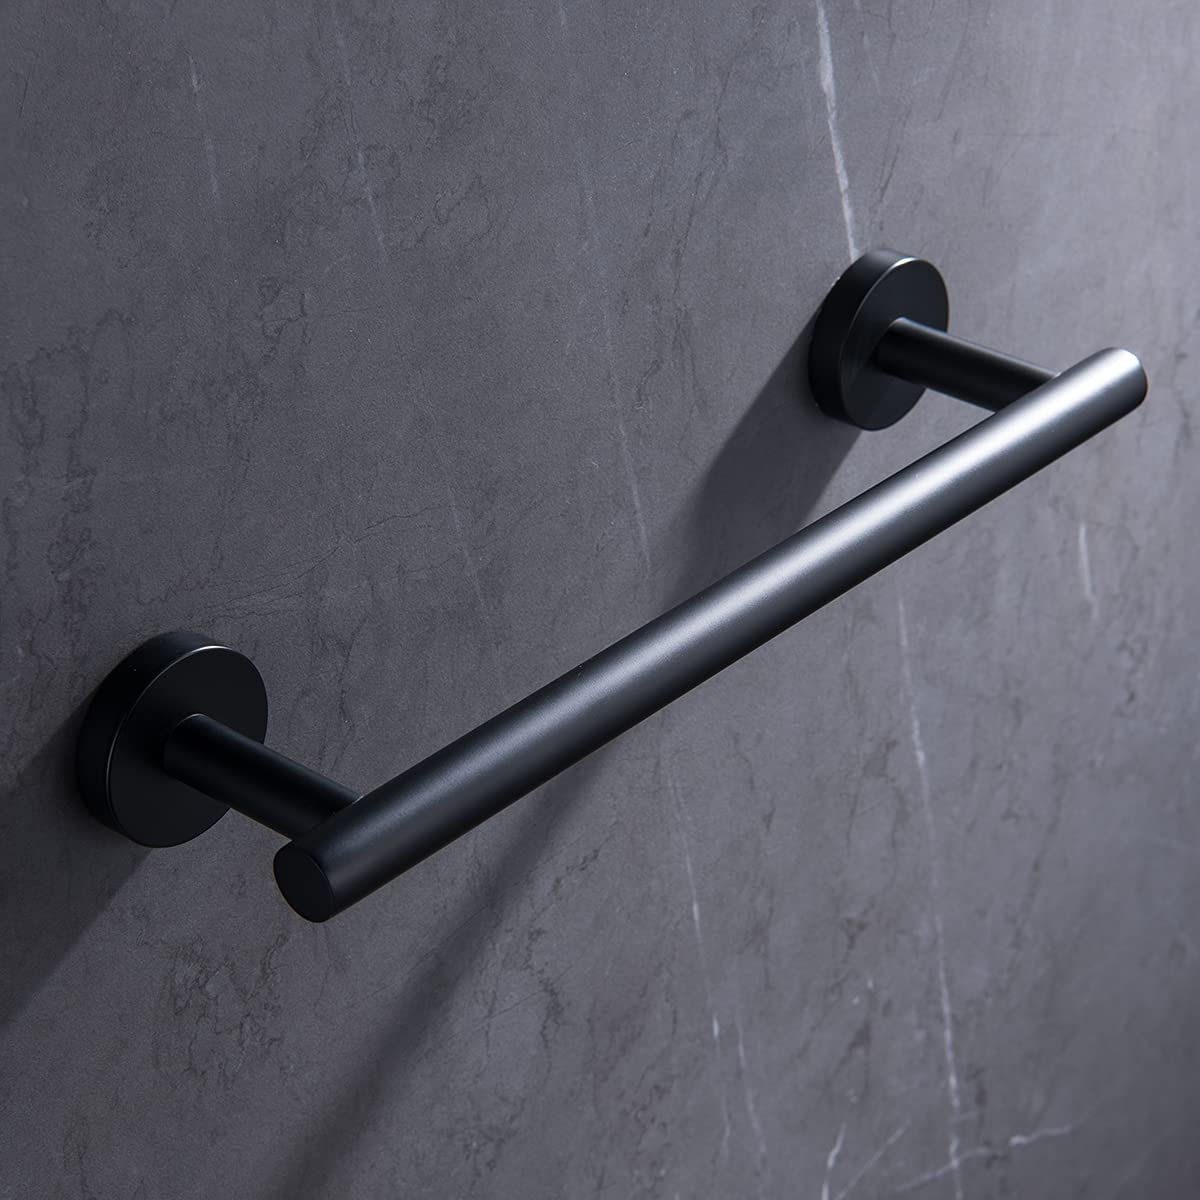 12 Inches Hand Towel Bar Stainless Steel Bathroom Towel Bar Holder Single Towel Rail Kitchen Dish Cloth Hanger - WELQUEEN